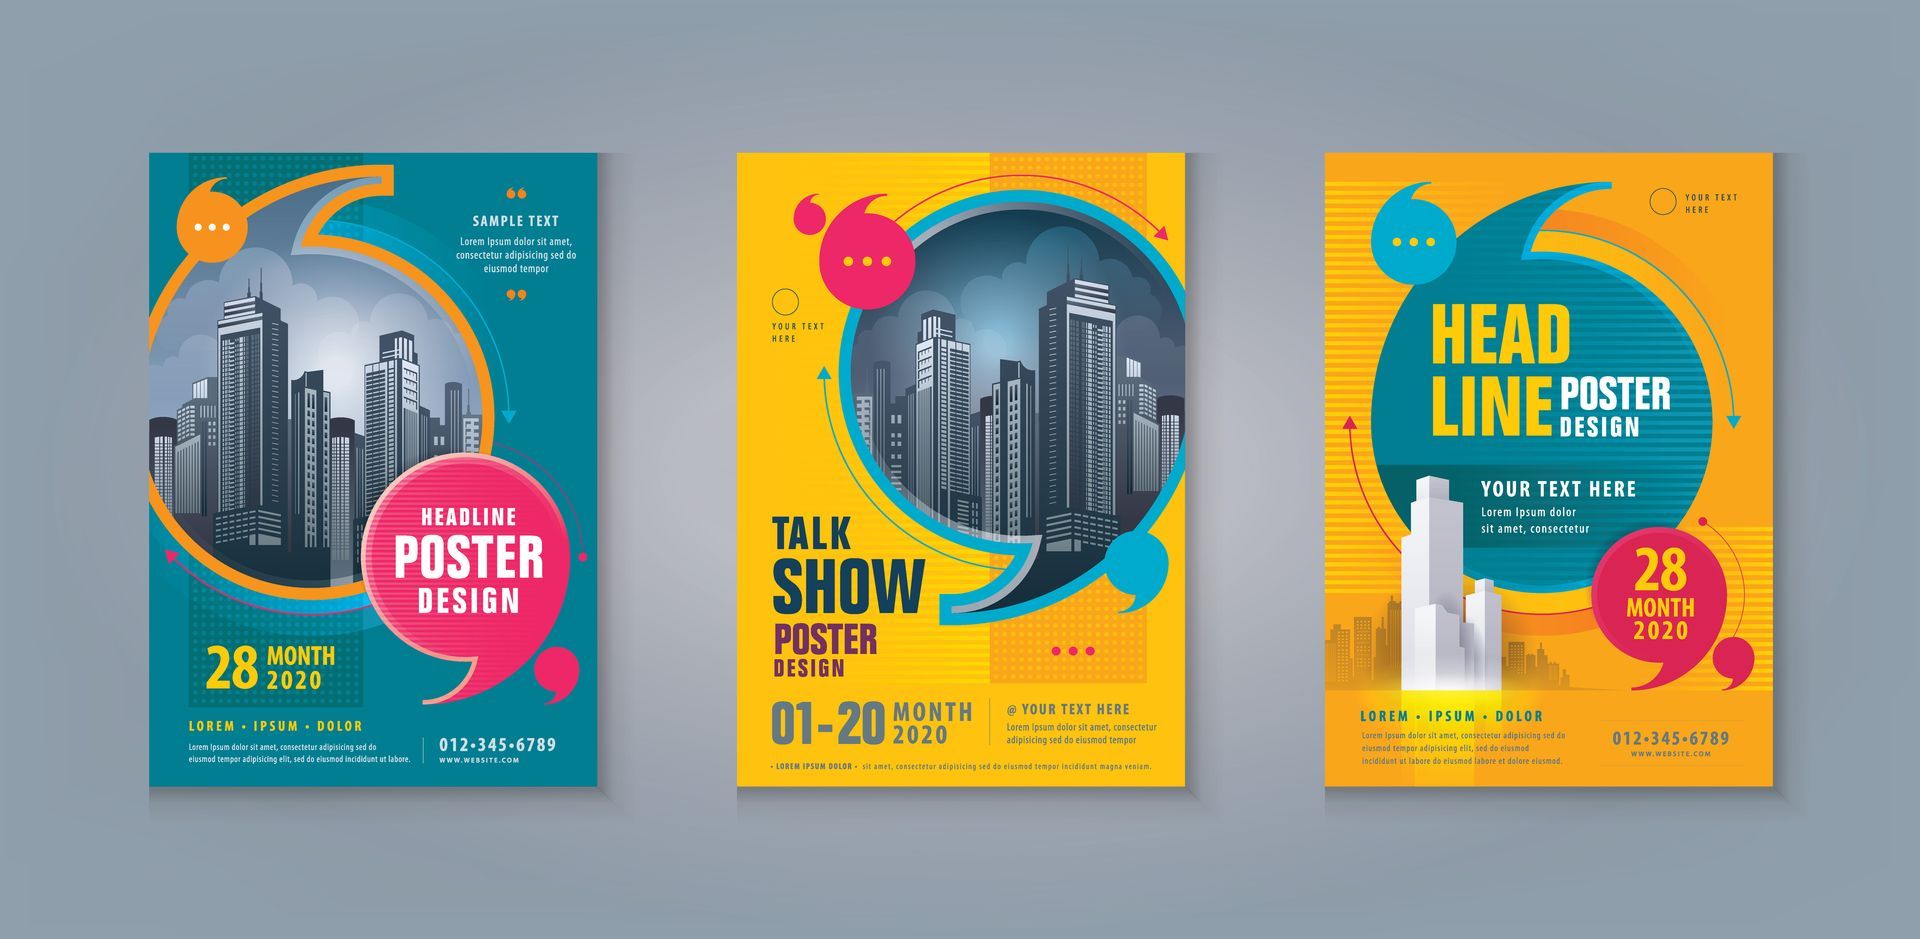 Seal Beach Custom Posters For Conferences & Trade Shows